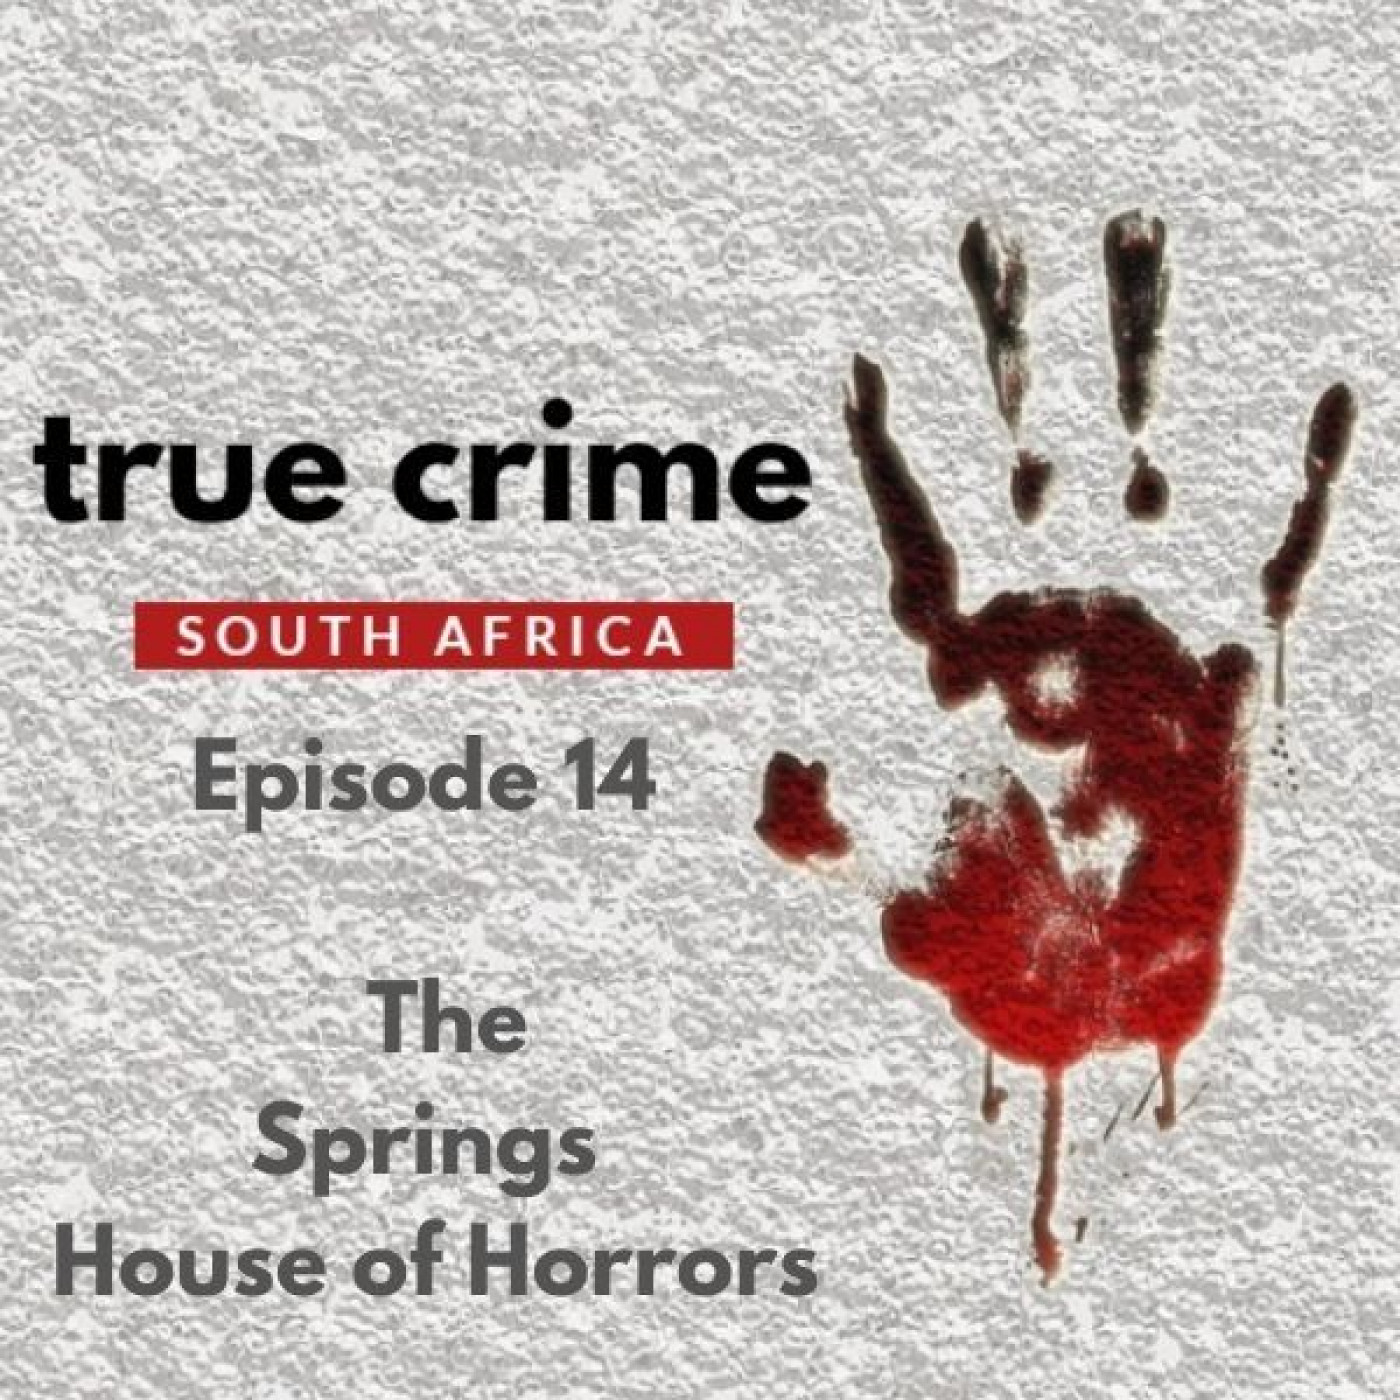 Episode 14 - The Springs House of Horrors